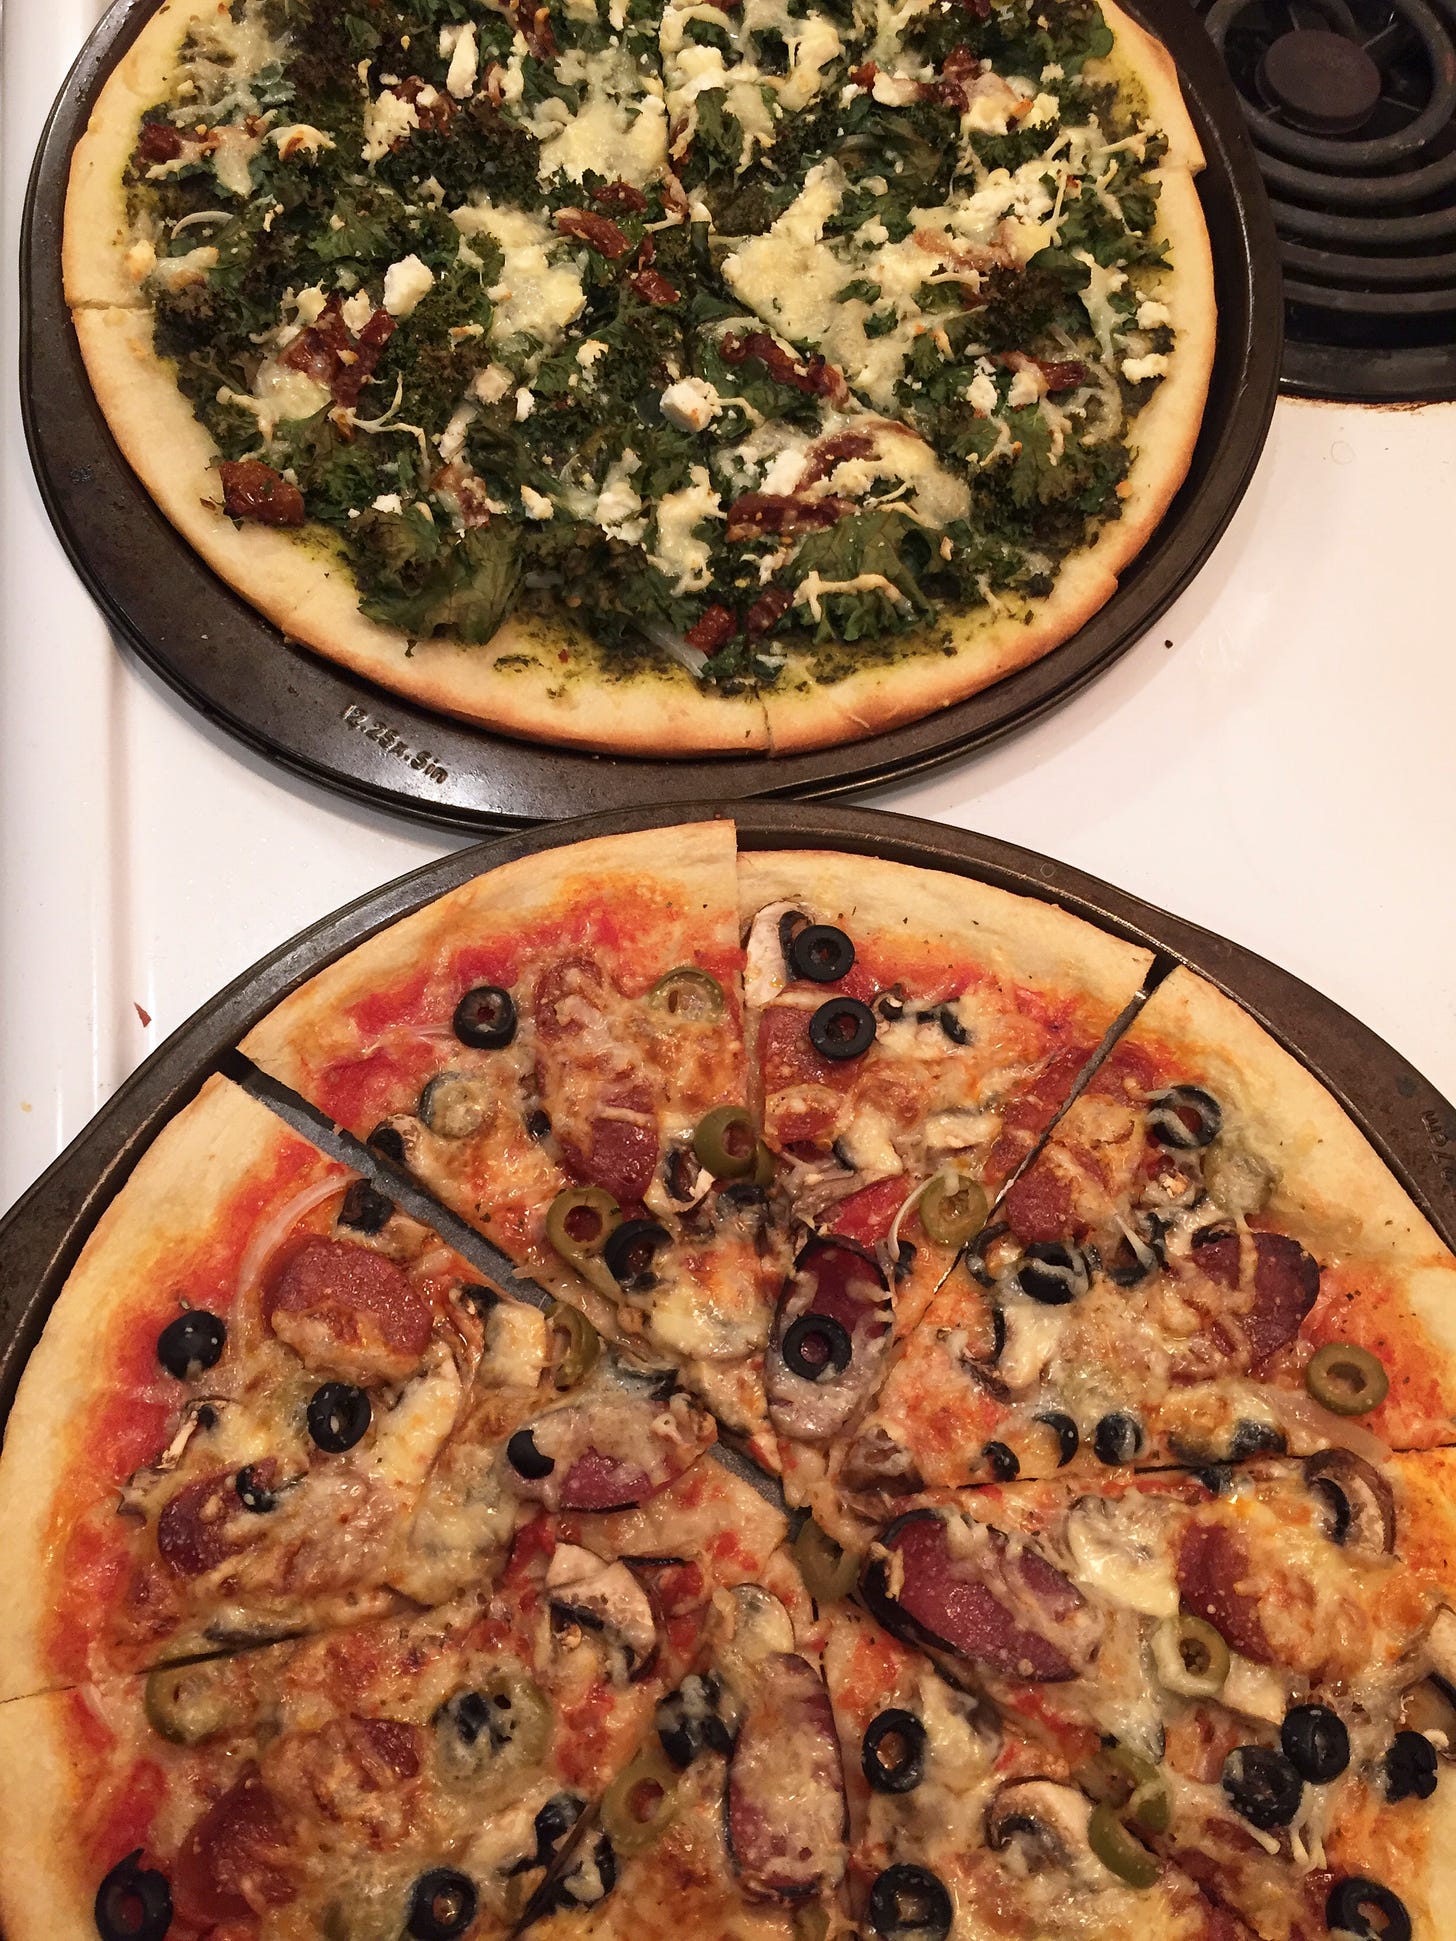 Two pizzas in their pans on top of the stove. At the back, a pesto base with kale, ricotta, and sun-dried tomatoes. At the front, red sauce with salami, mushrooms, and olives.